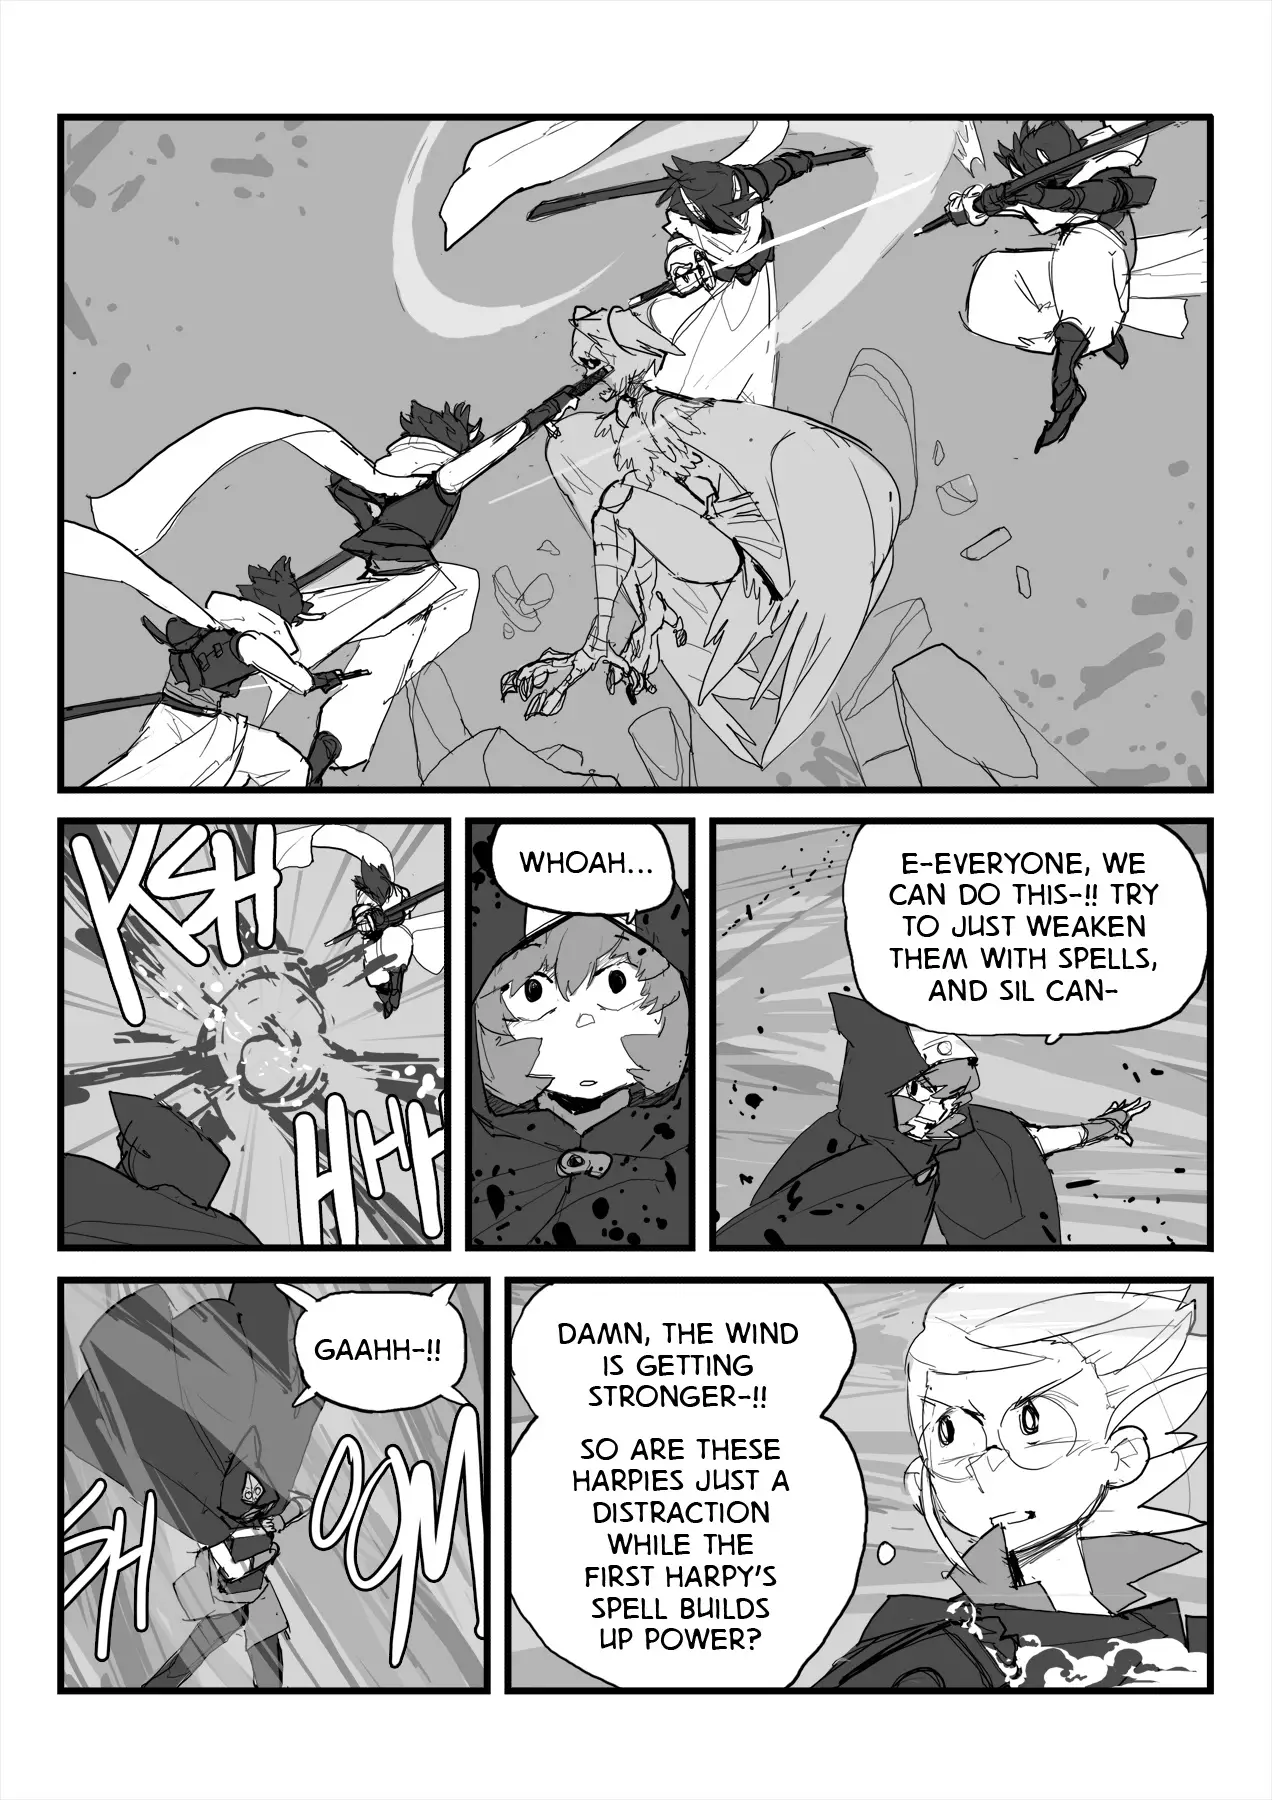 Spellcross - 22 page 16-09dadfc0